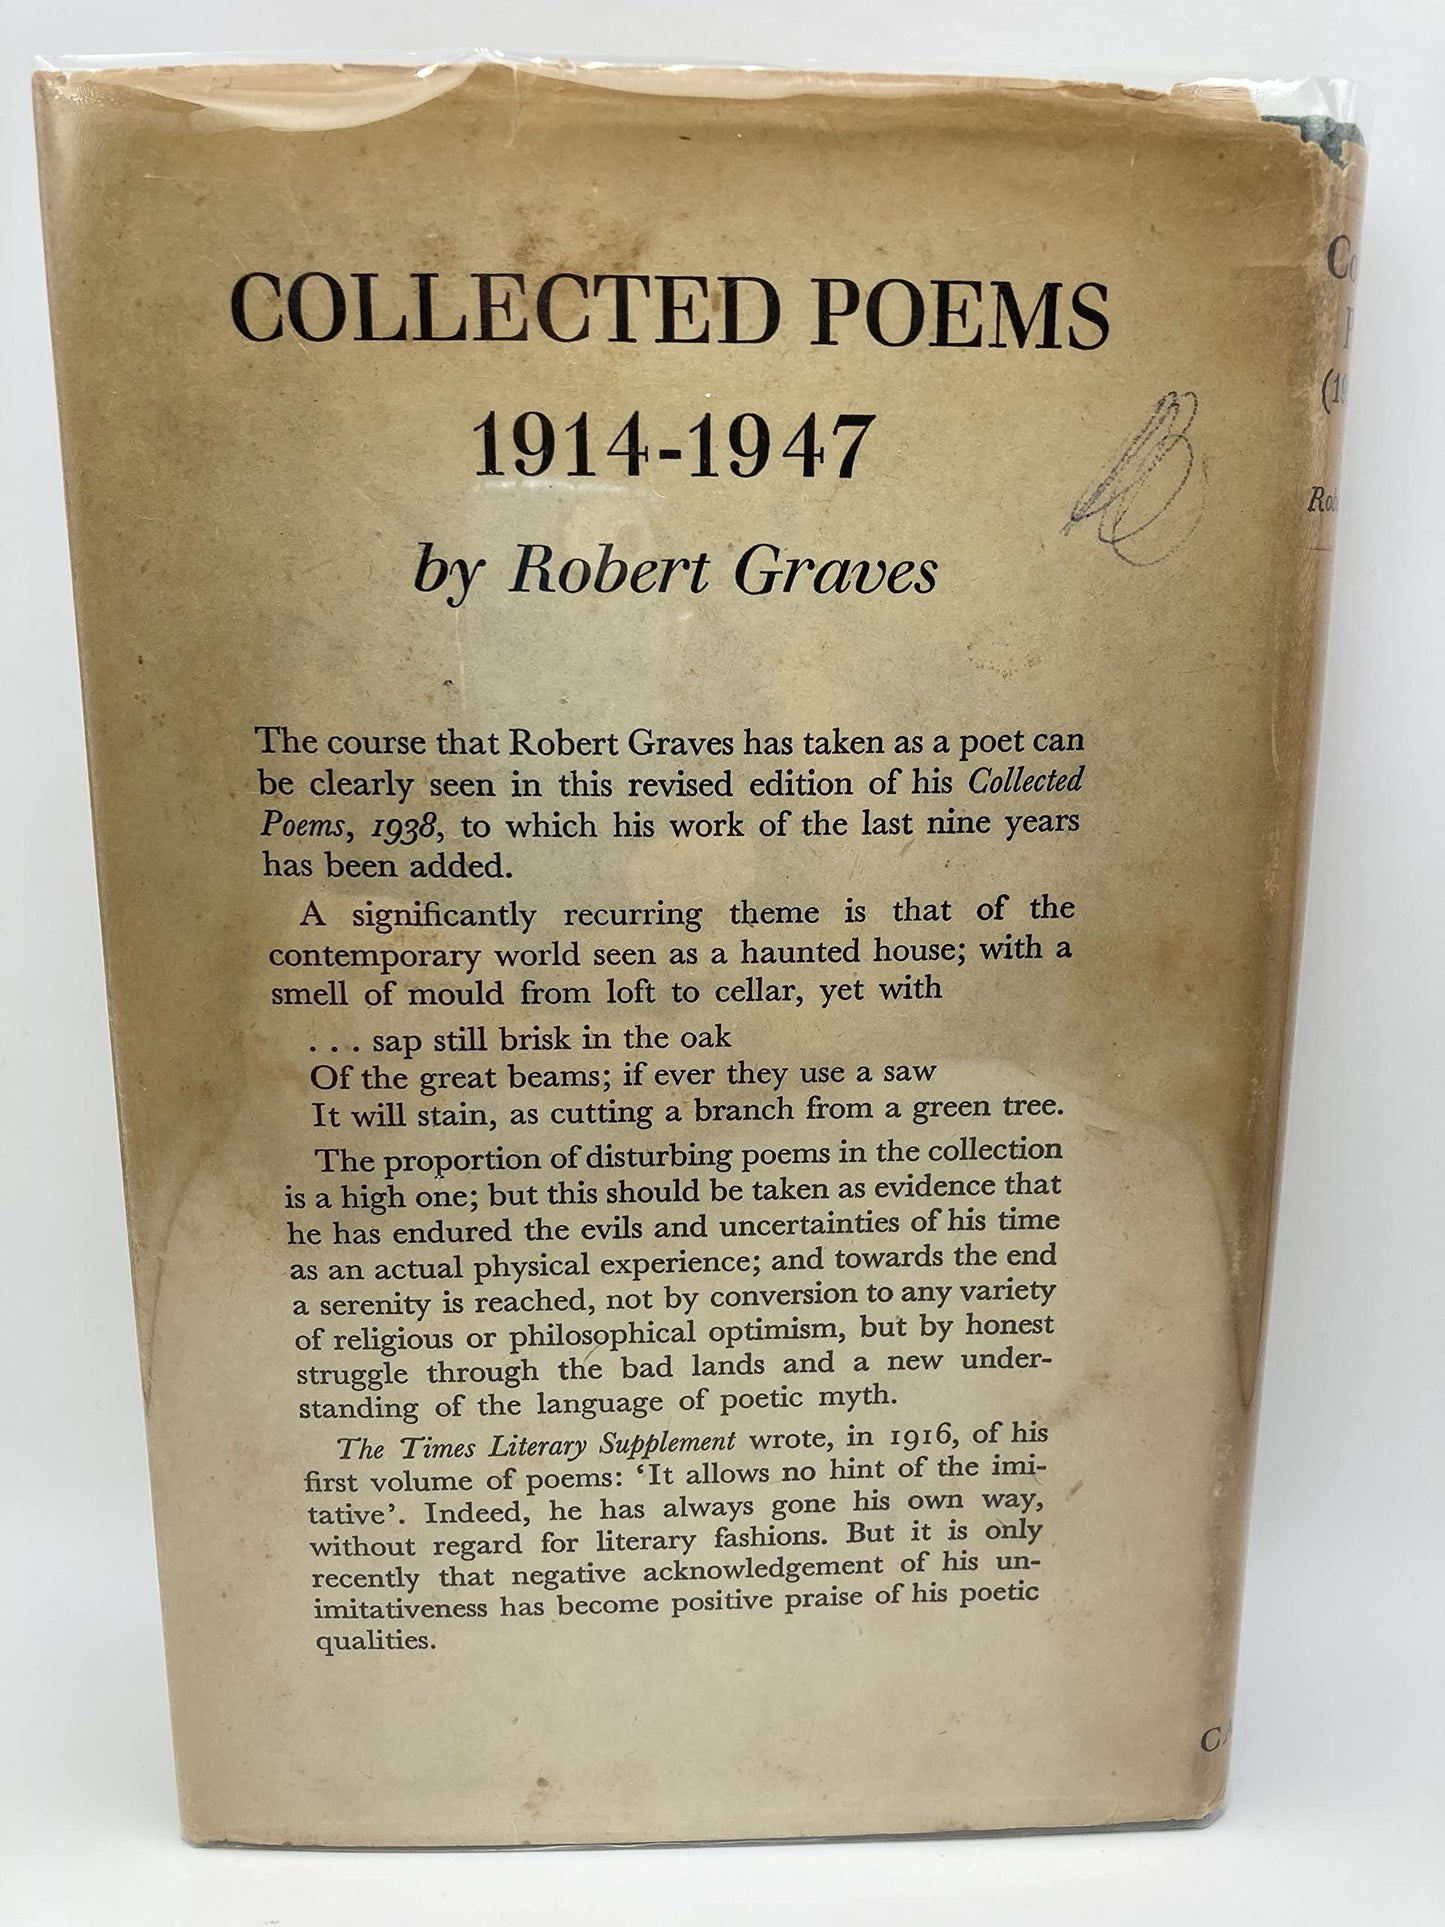 Collected Poems (1914-1947)